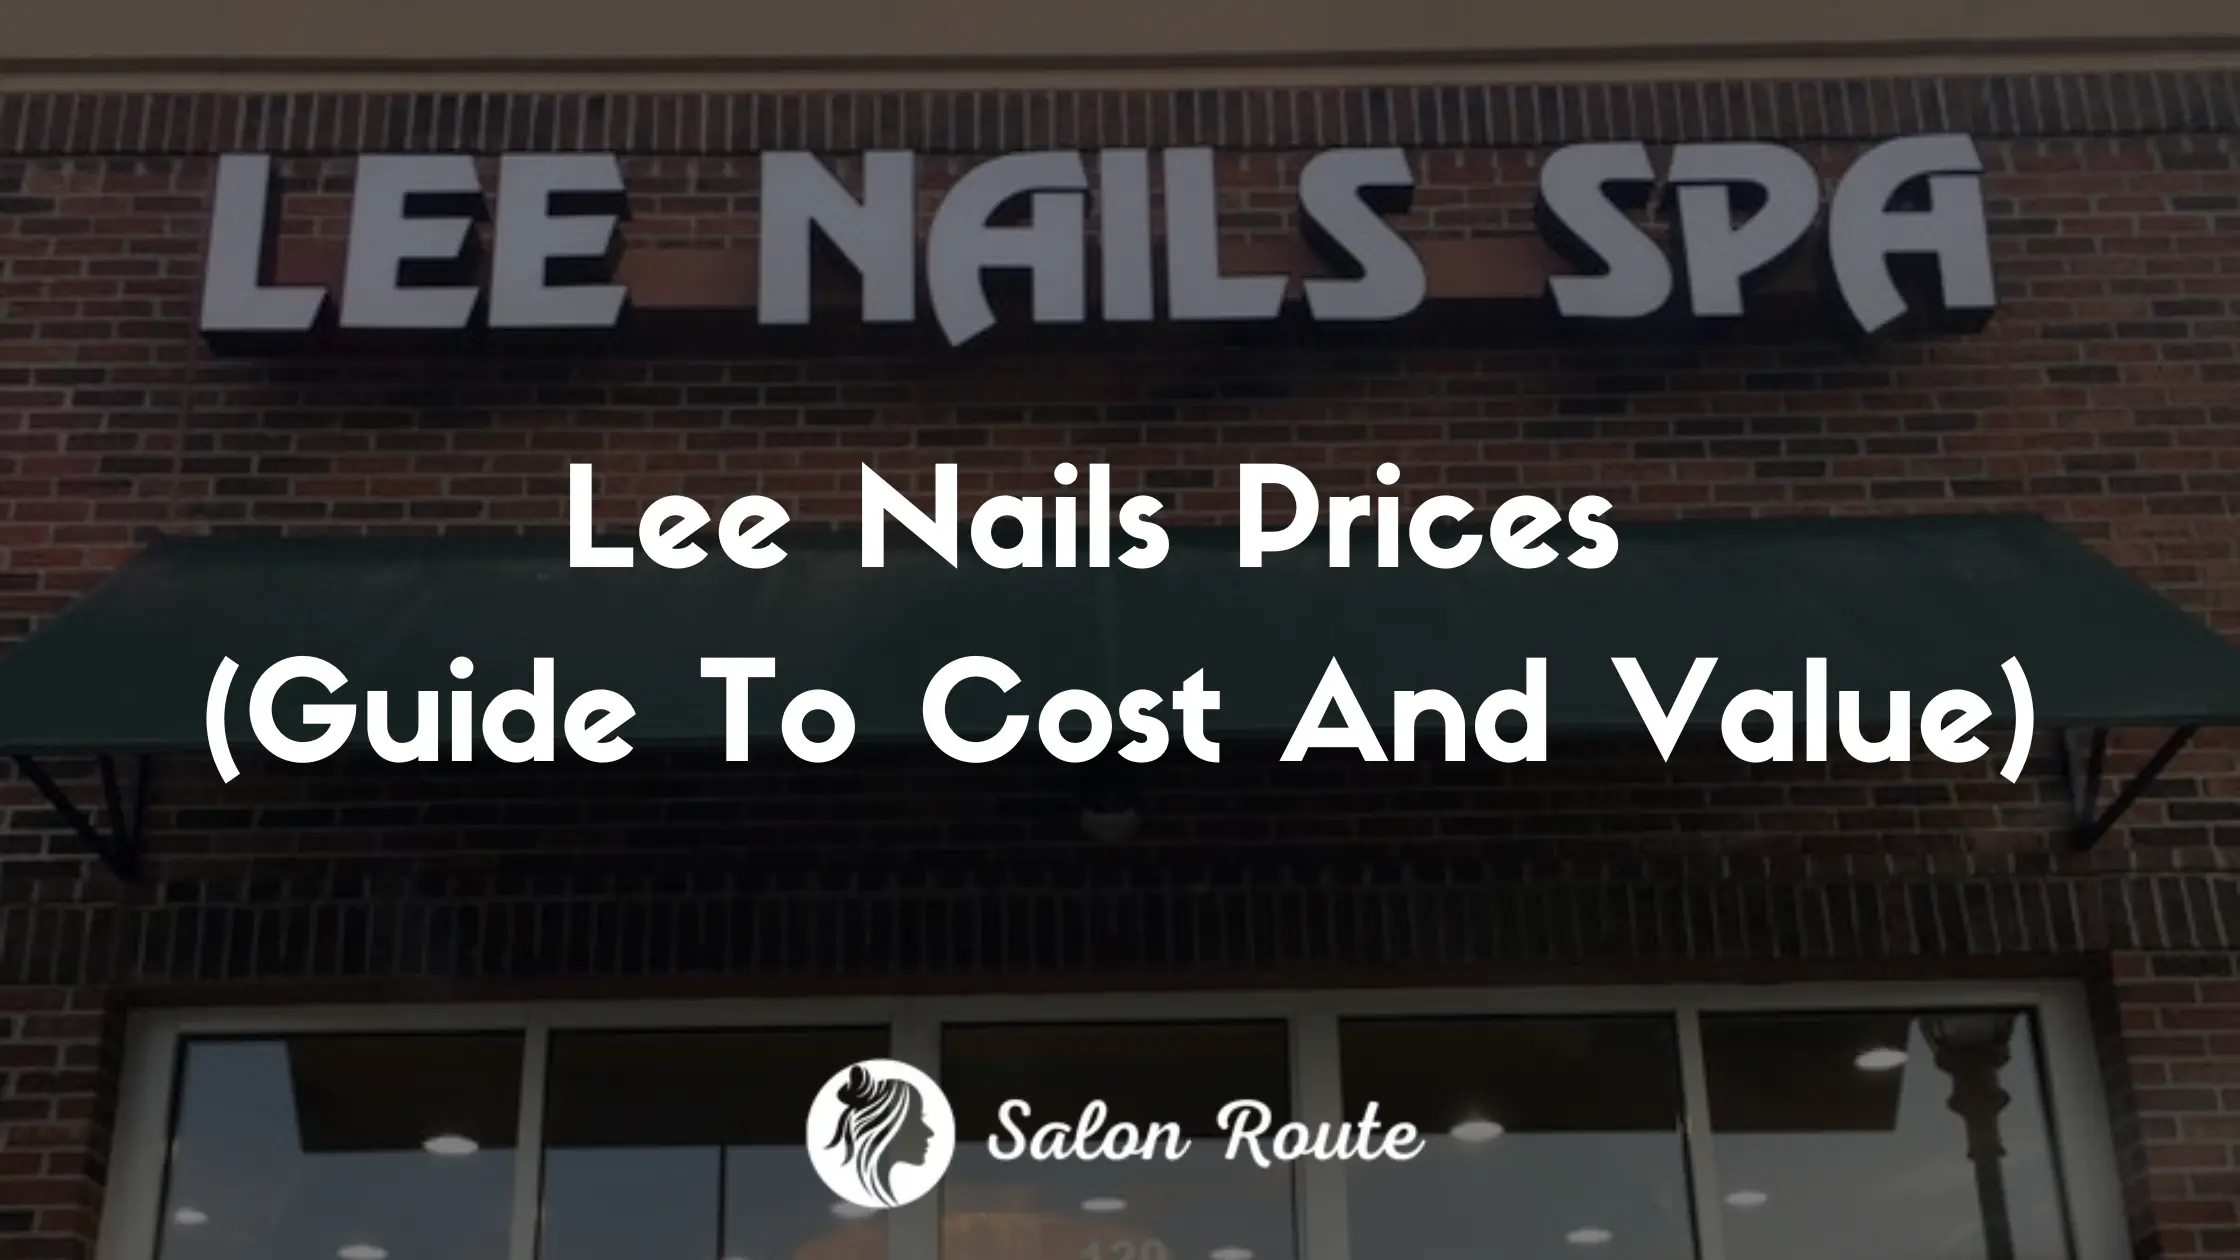 Lee Nails Prices (Guide To Cost And Value)